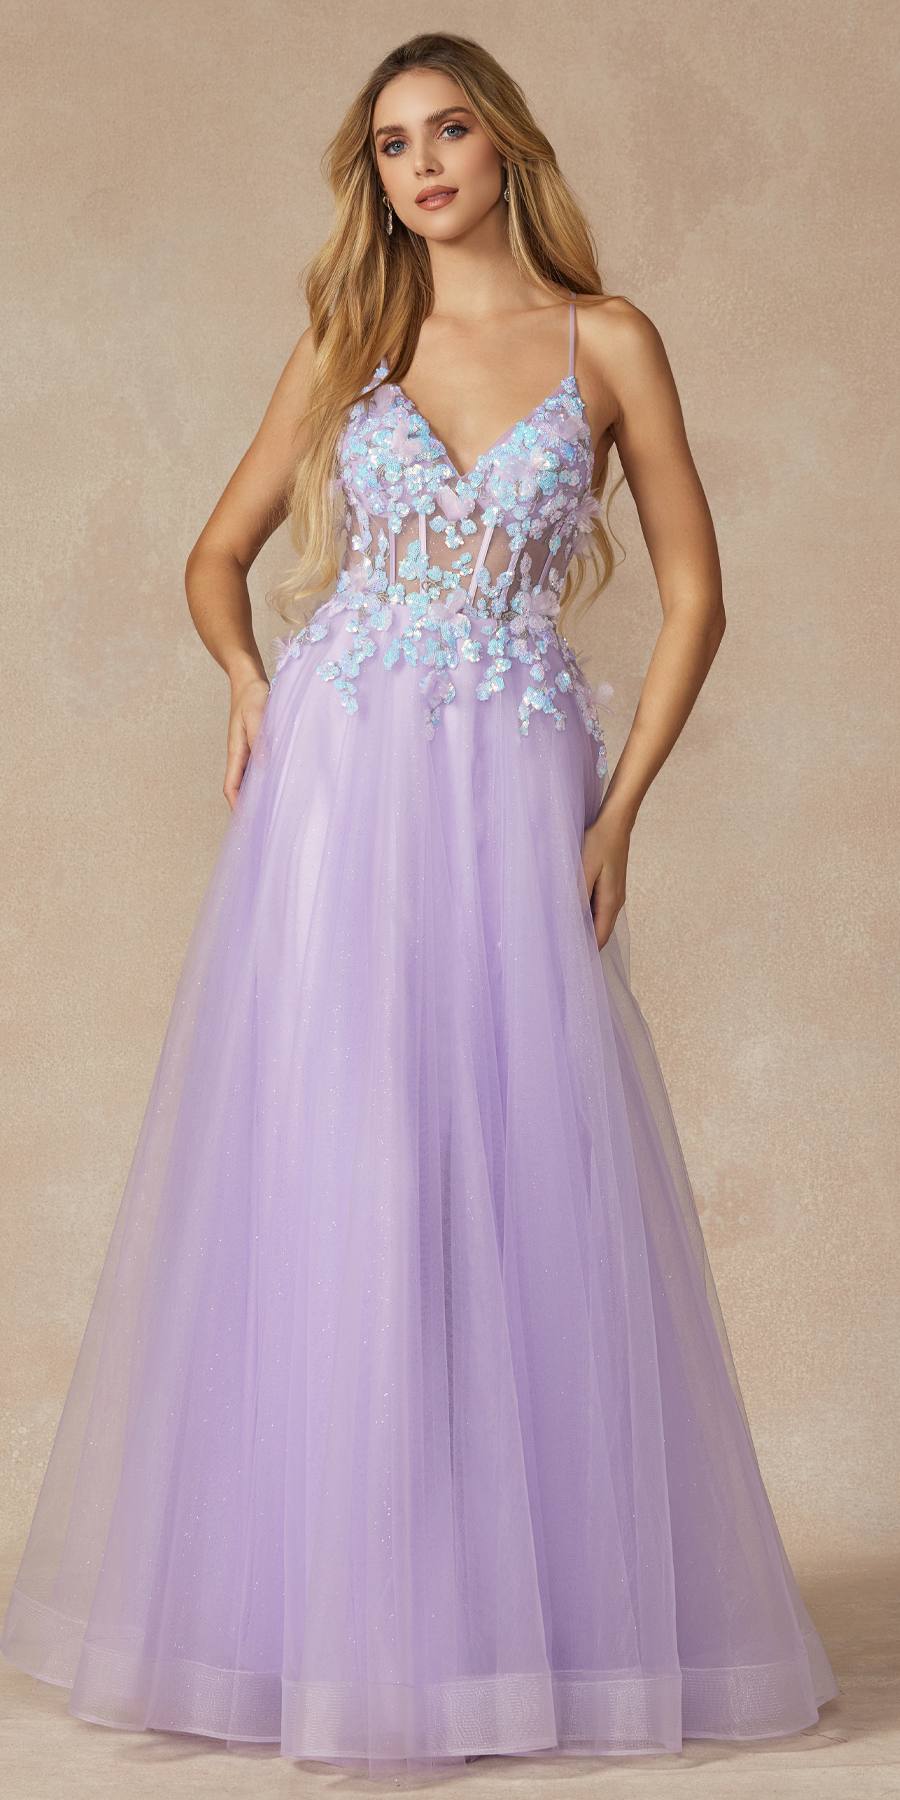 Juliet 2401 Floor Length A-Line Tulle Gown with Detachable Puff Sleeves